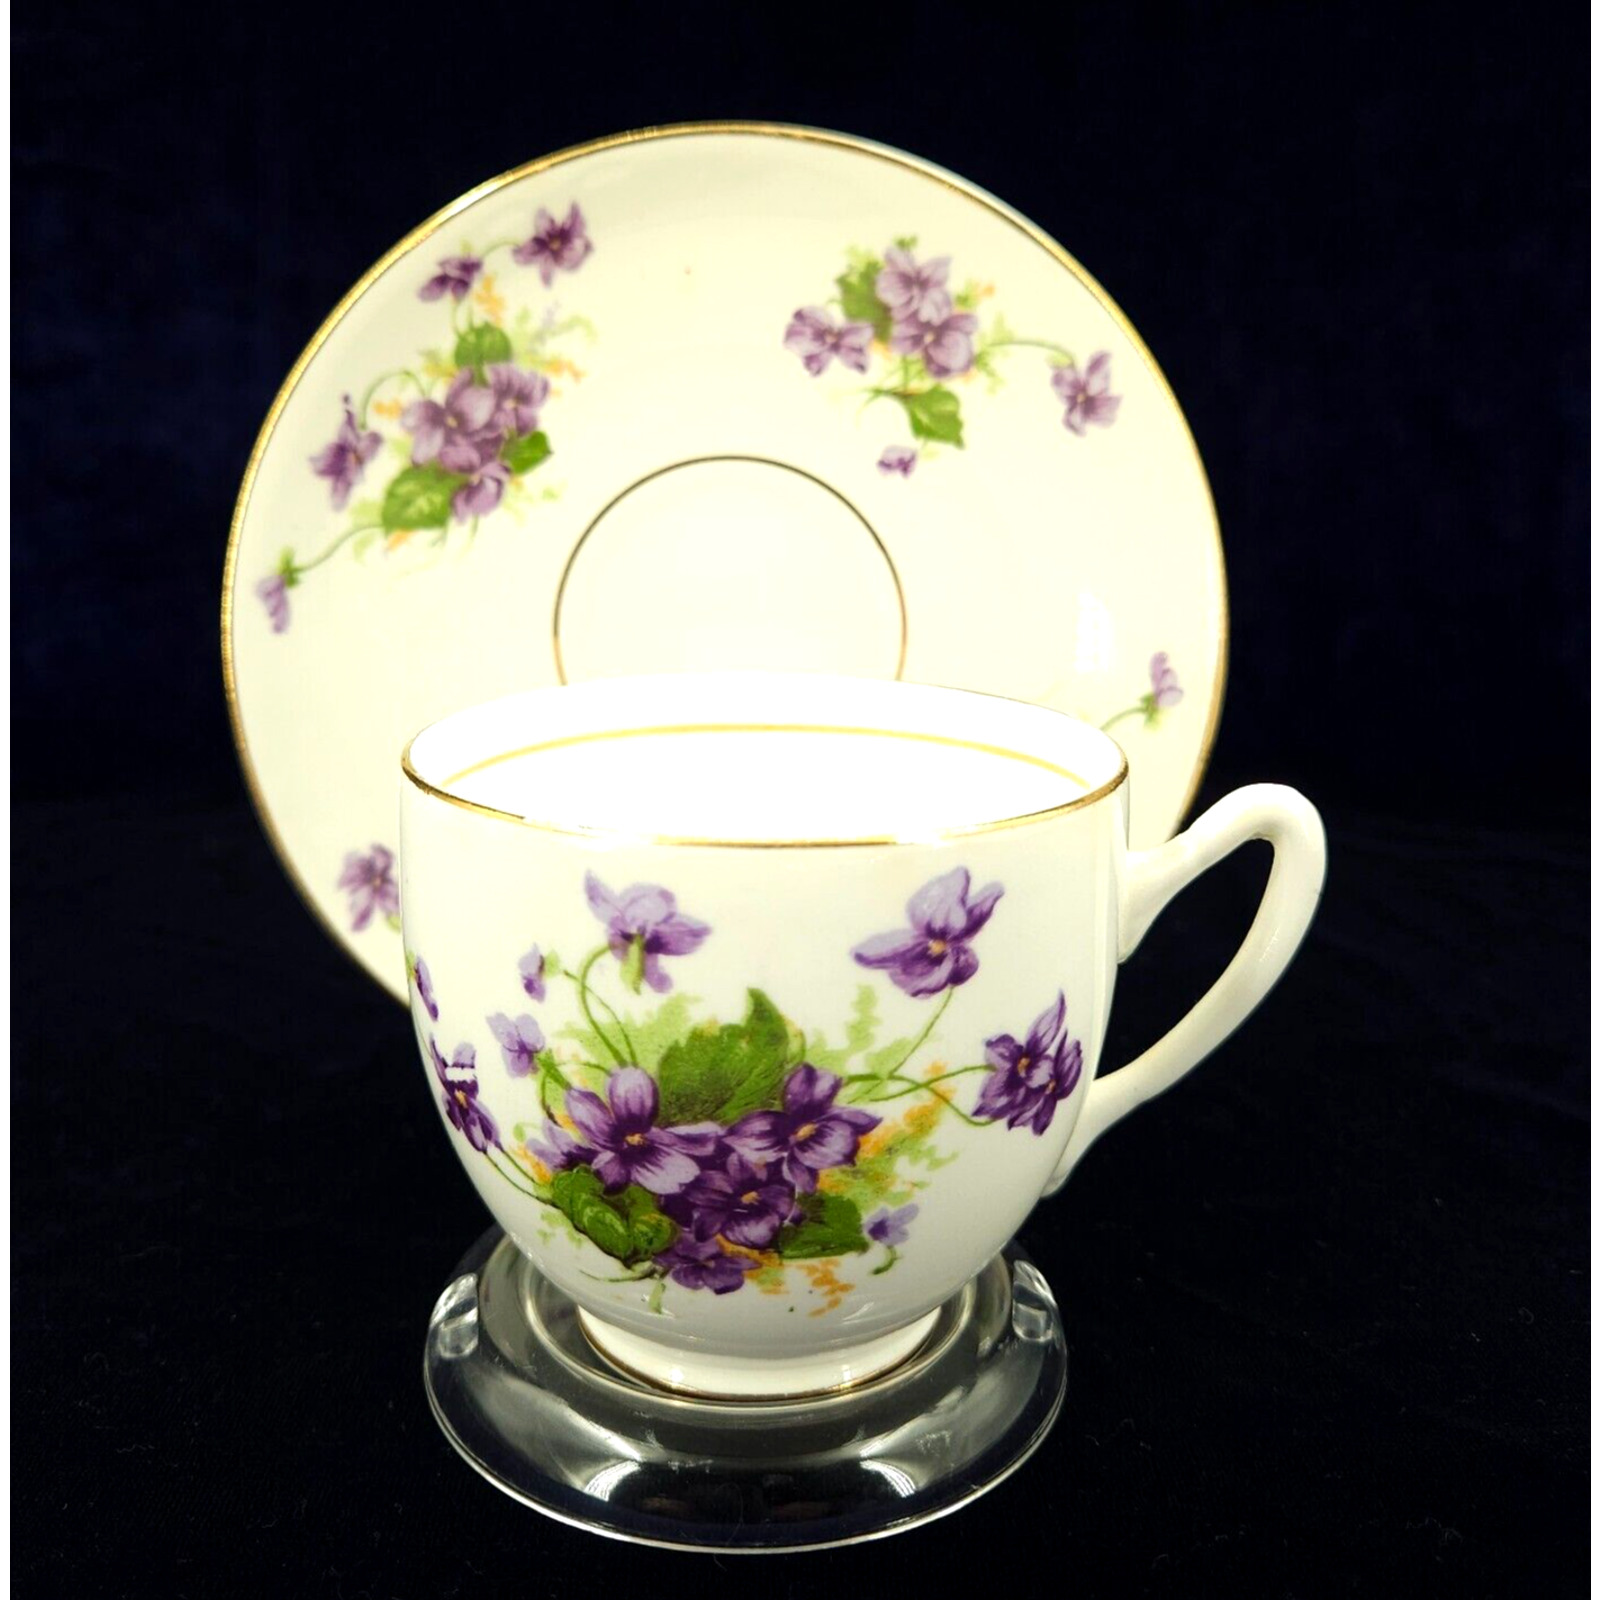 Vtg Duchess Tea Cup and Saucer Purple Violets Bone China England Replacement